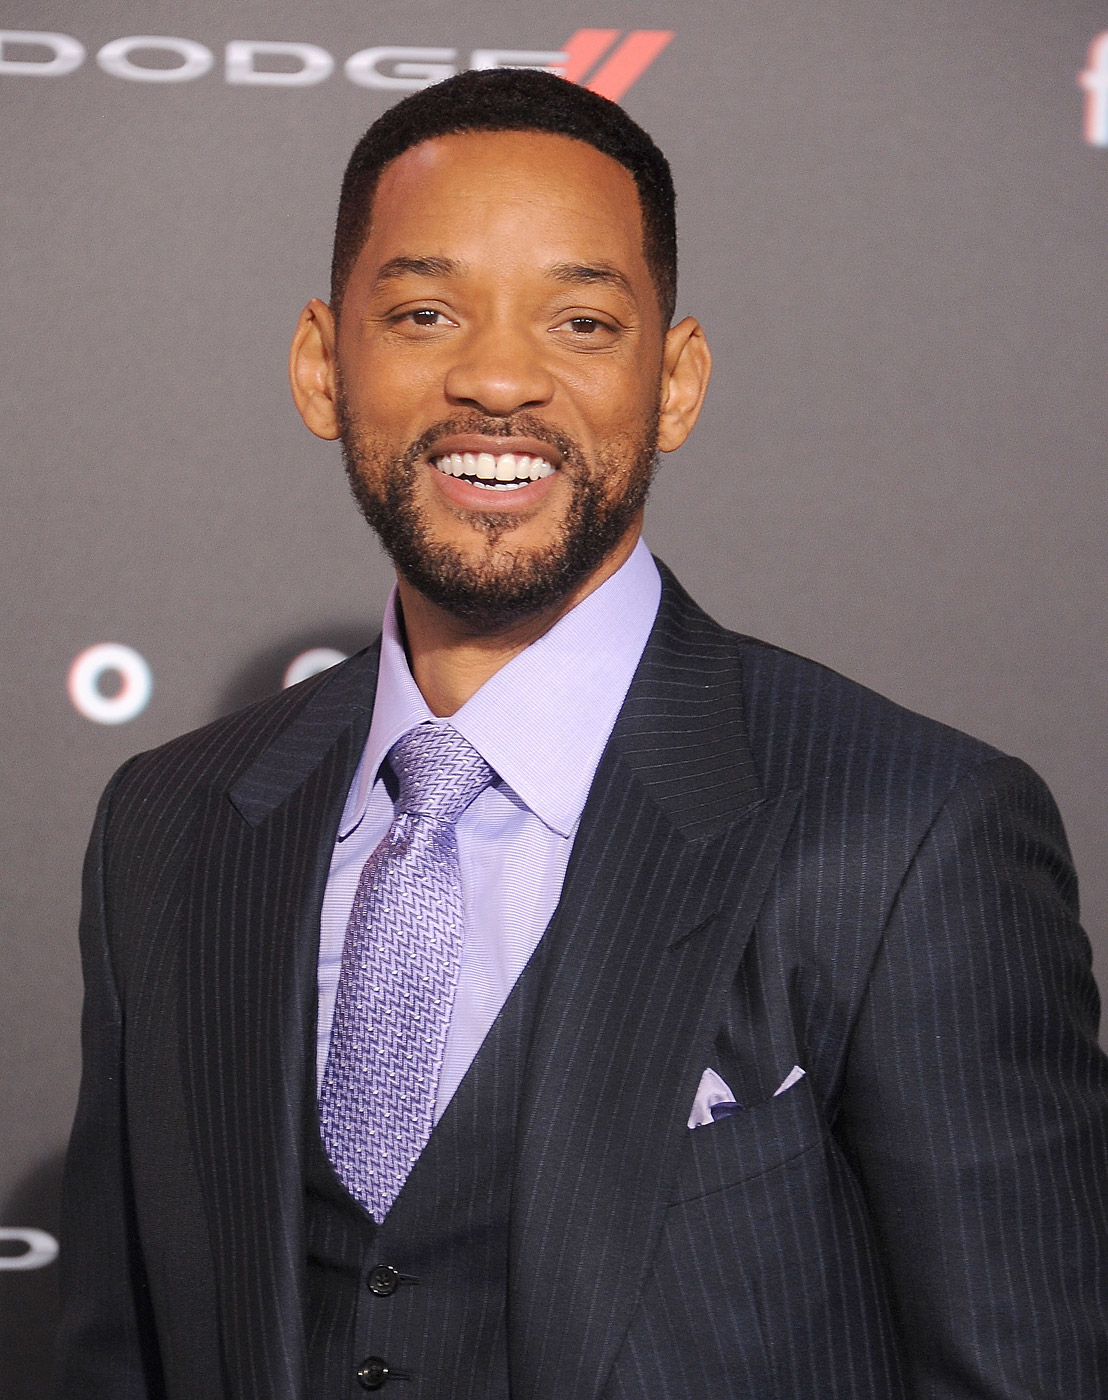 Will Smith arrives at the Los Angeles World Premiere of <i>Focus</i> at TCL Chinese Theatre on Feb. 24, 2015 in Hollywood, Calif. (Gregg DeGuire—WireImage/Getty Images)